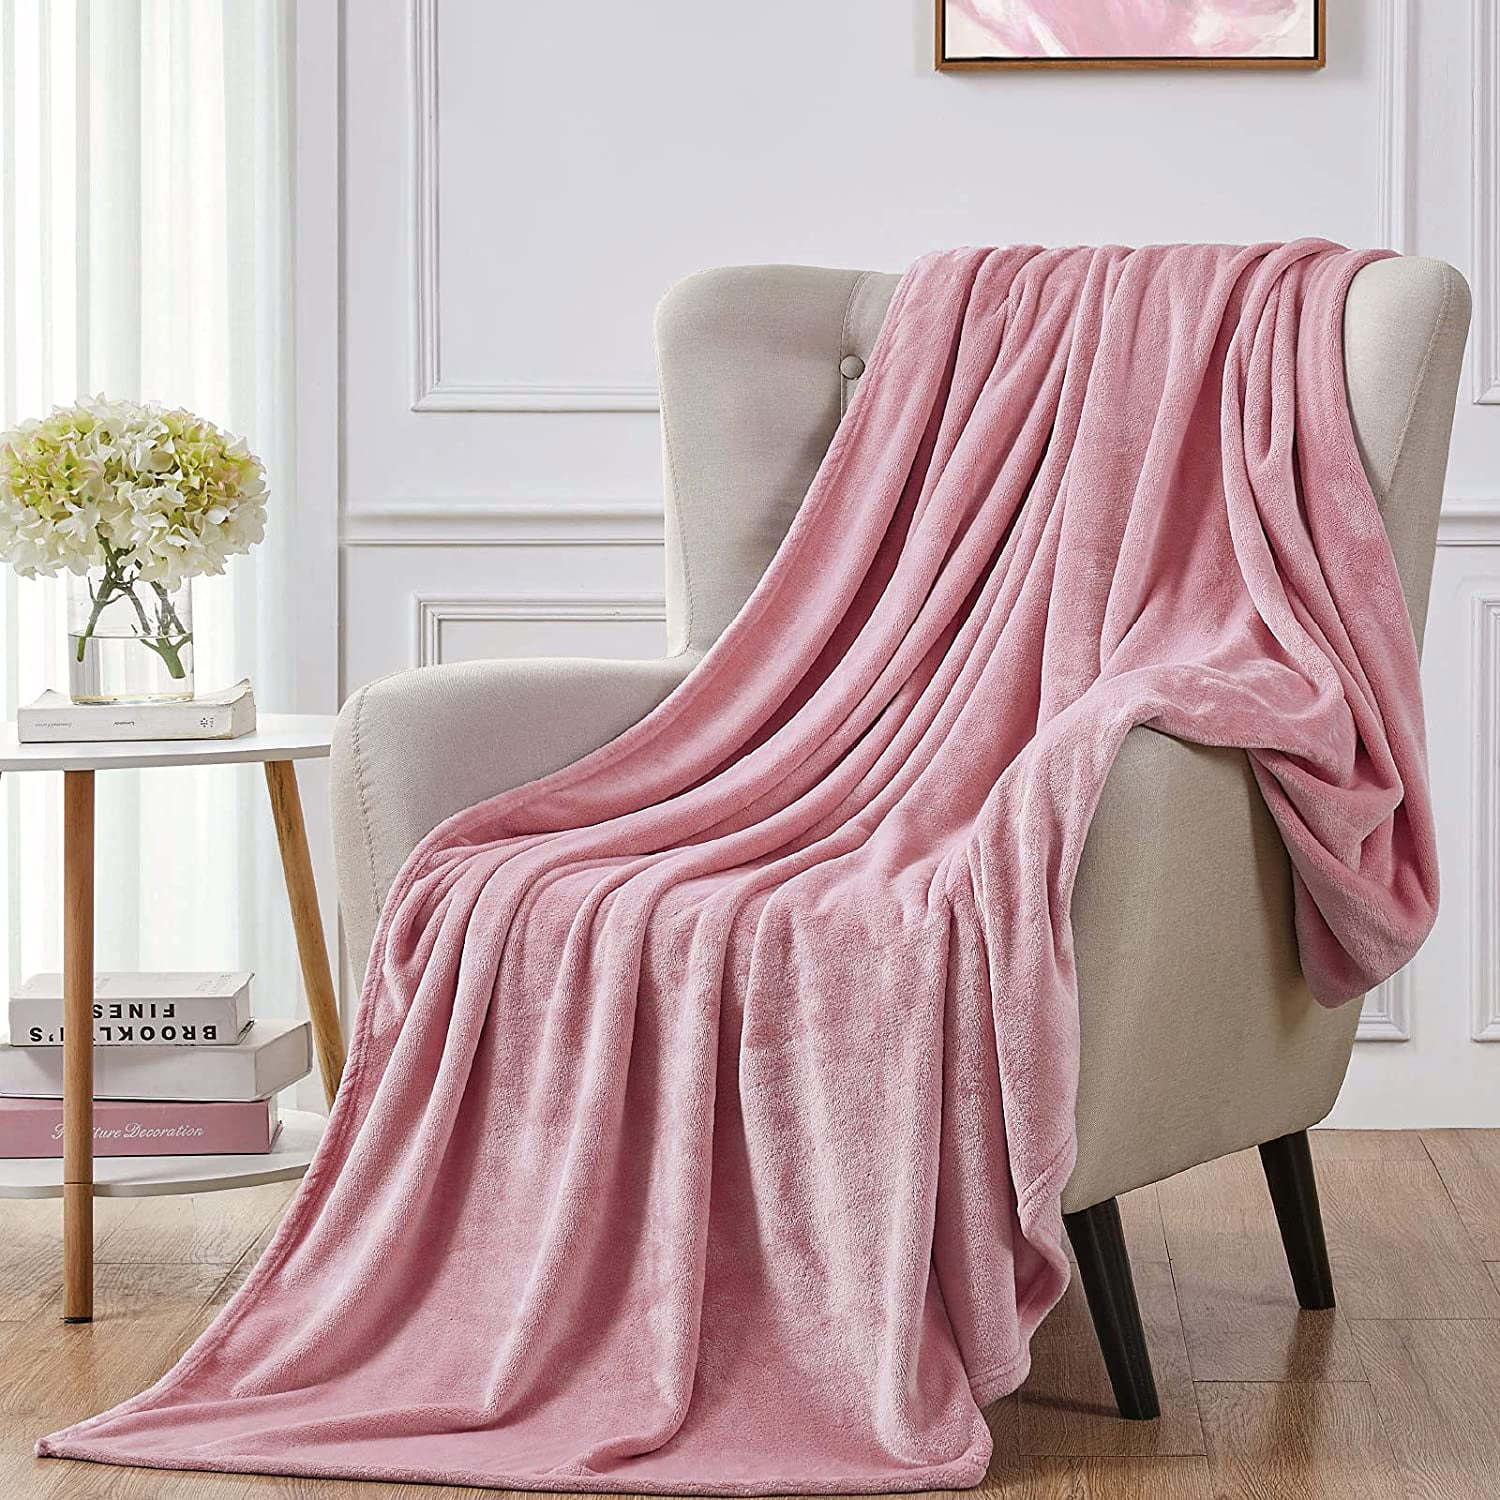 Blanket Ultra-Soft Lightweight Flannel Blanket Sofa Sofa All Season Warm and Comfortable Anti-Pilling Flannel 40x50 6 Fourth July Holiday 